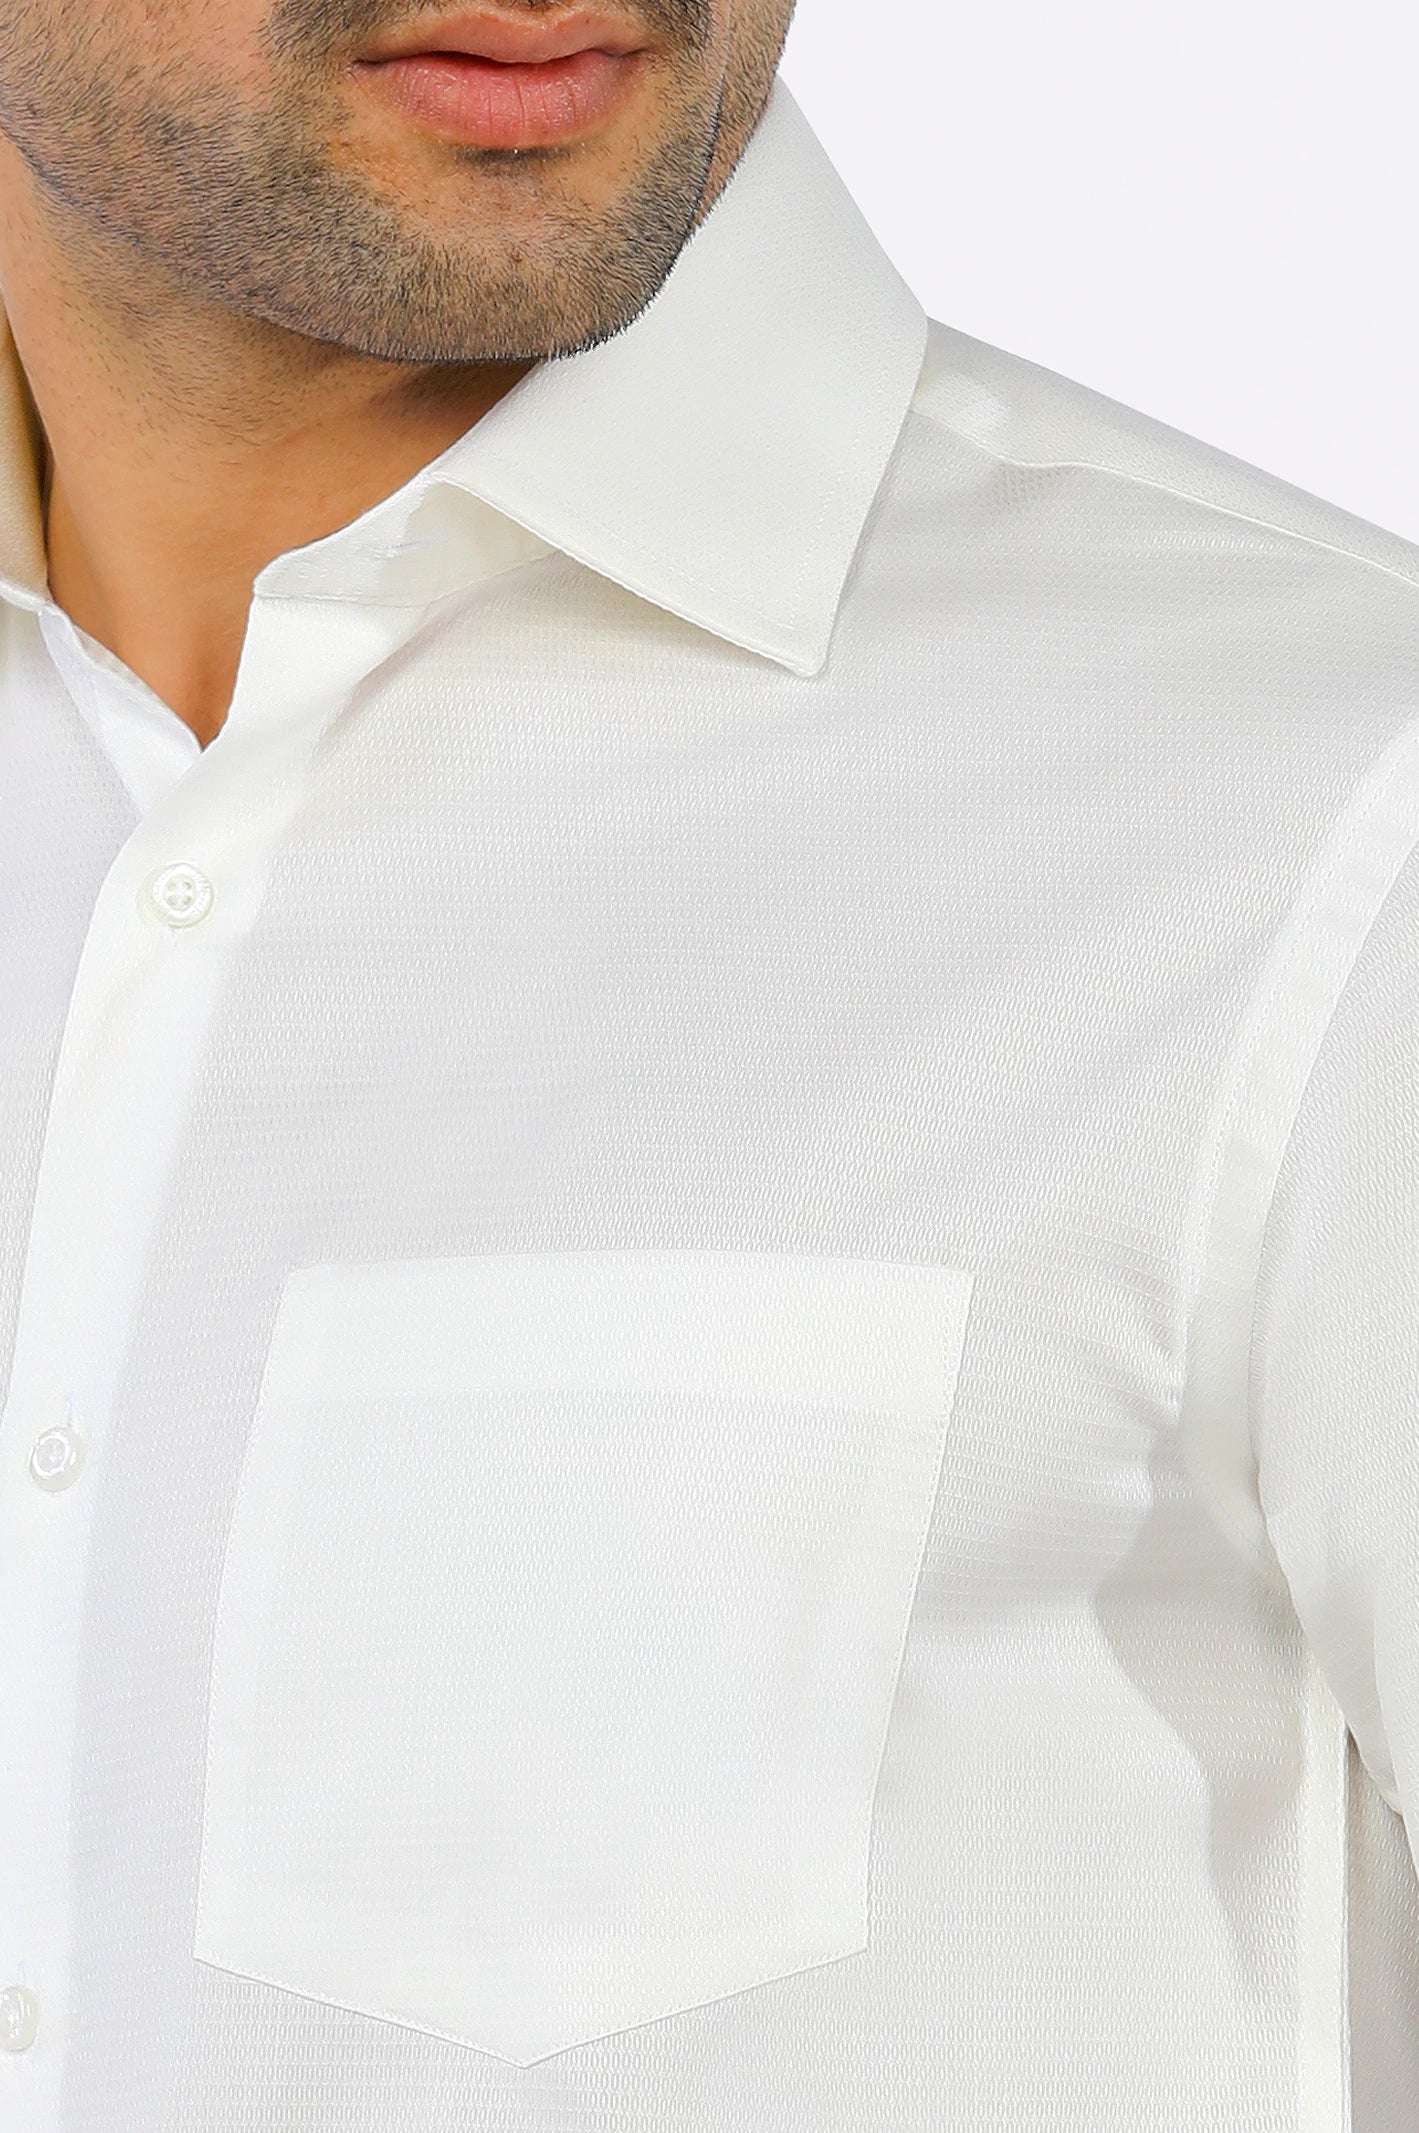 Off White Self Textured Formal Shirt From Diners